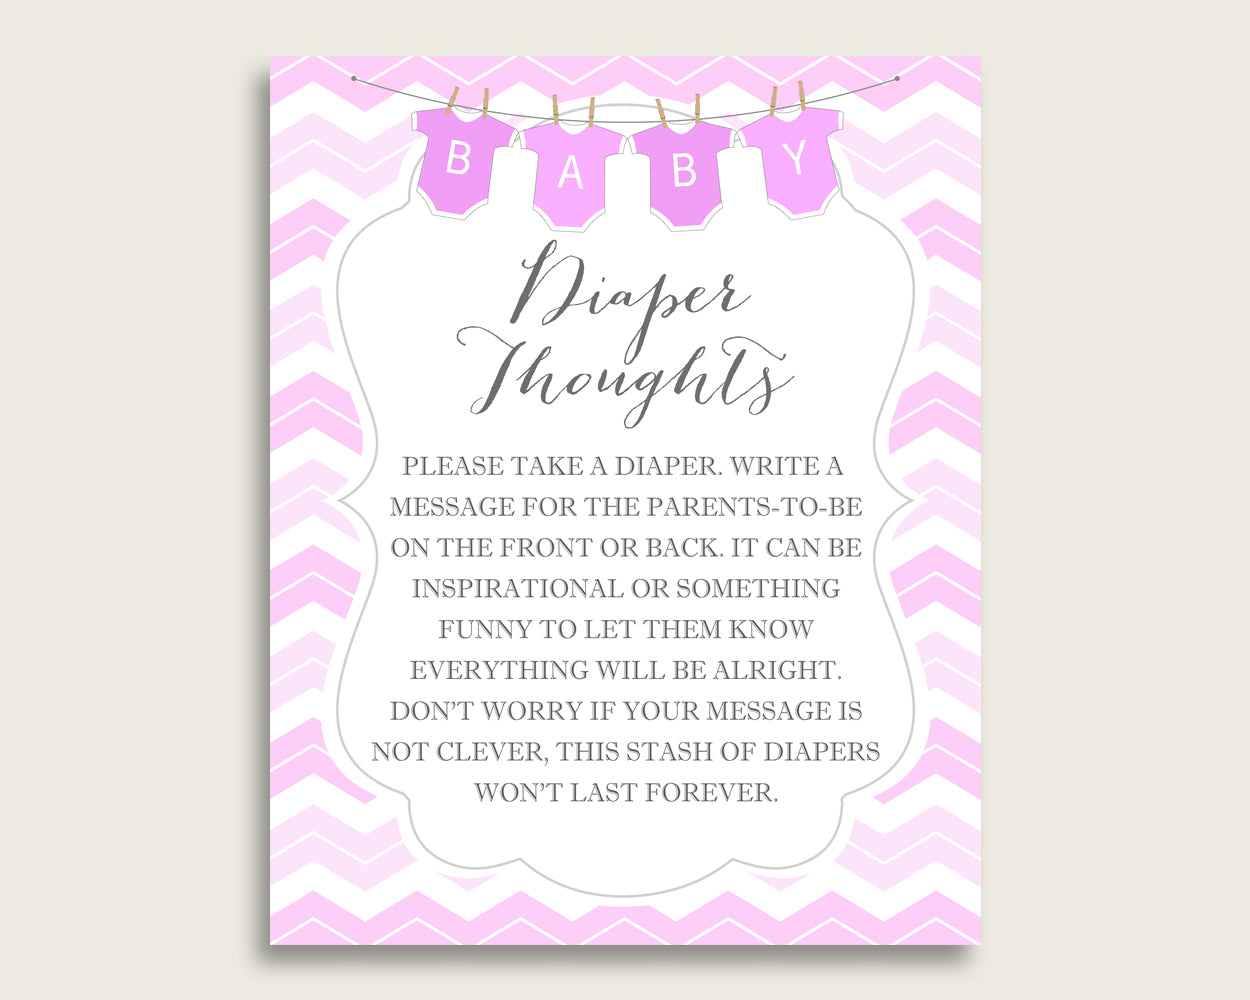 Chevron Baby Shower Diaper Thoughts Printable, Girl Pink White Late Night Diaper Sign, Words For Wee Hours, Write On Diaper Message cp001